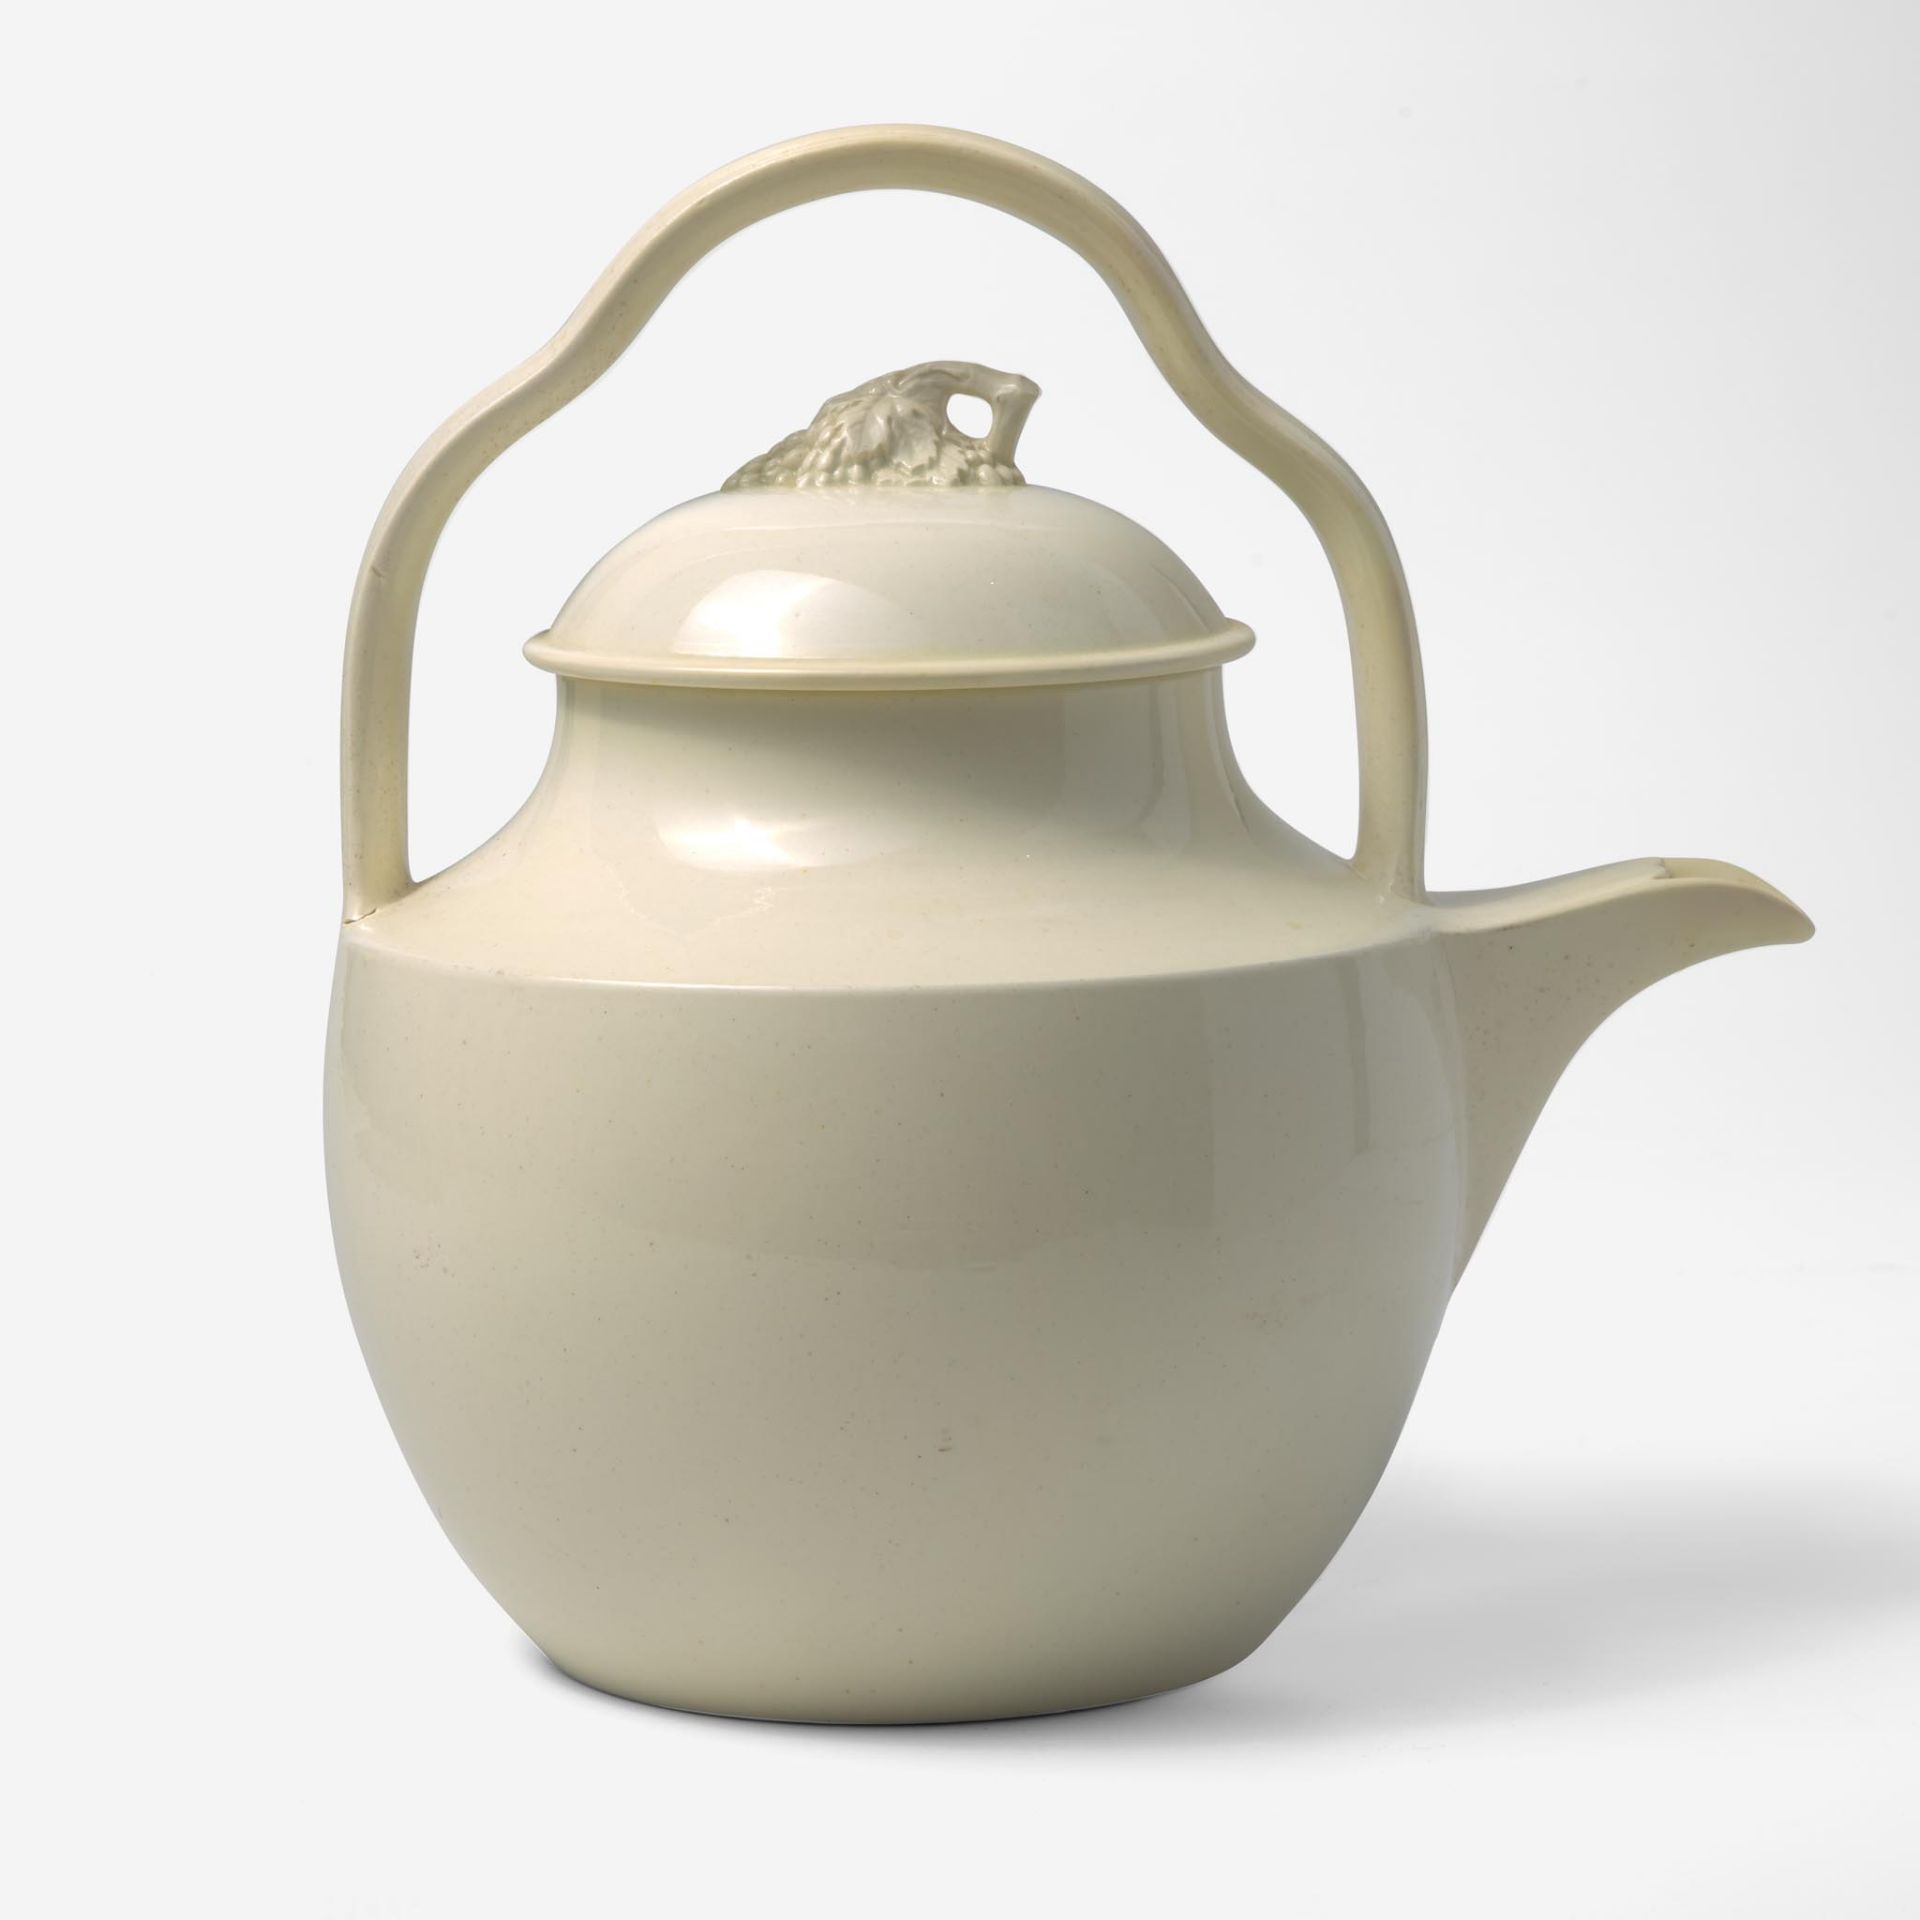 A Wedgwood Queensware Bail Handled Rum Pot with "Bunch-of-Grapes" Knop UK, circa 1800 - Image 2 of 4